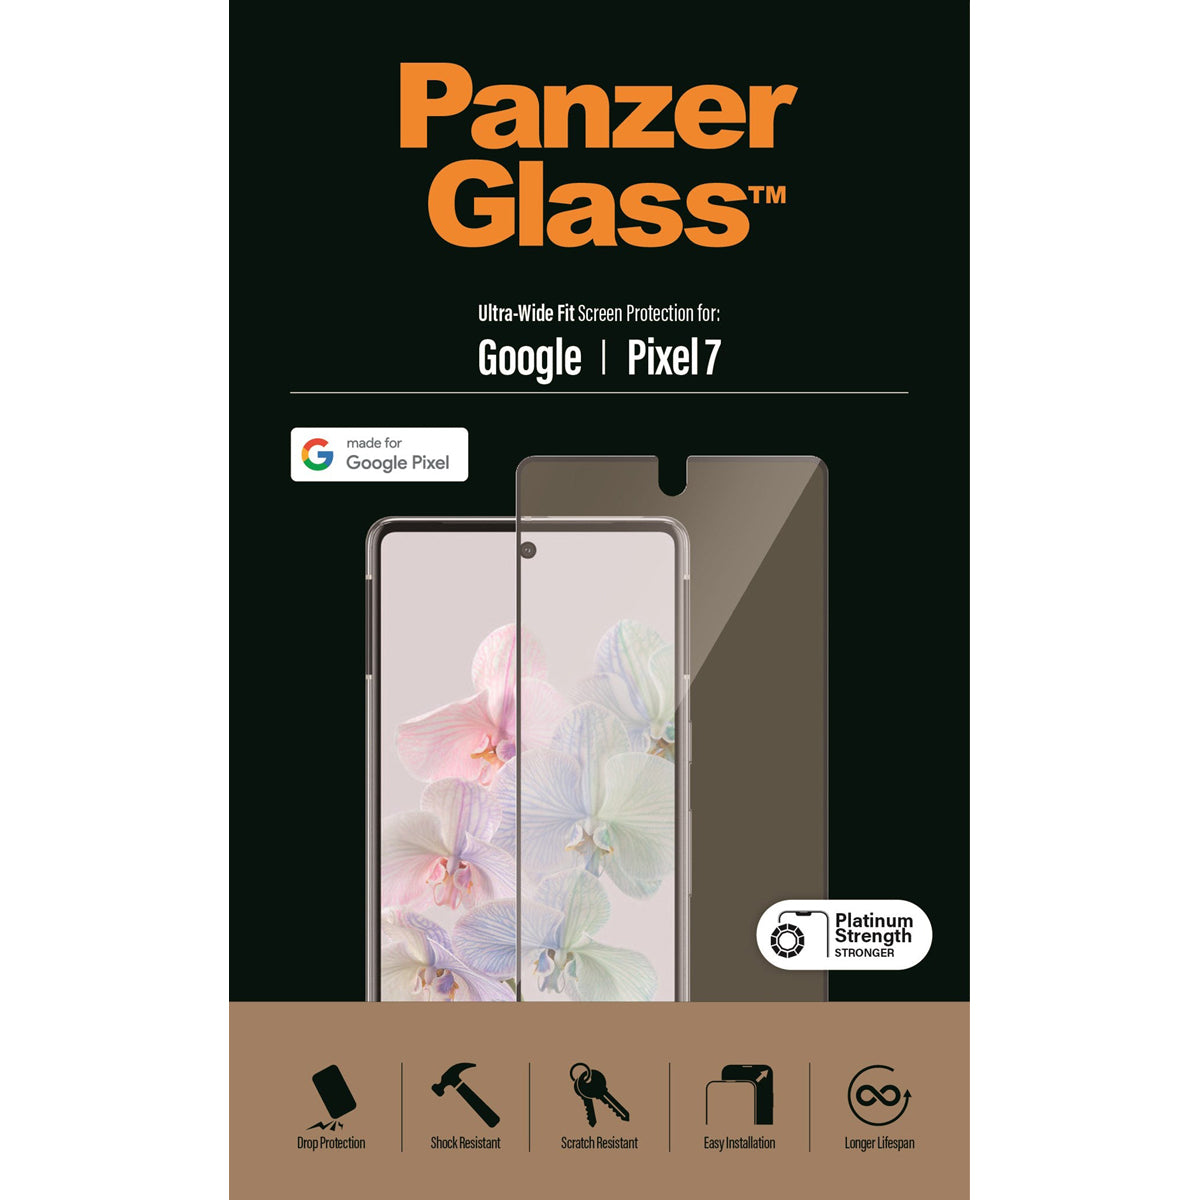 PanzerGlass Ultra-Wide Fit Antibacterial Screen Protector for Google Pixel 7 - Clear.